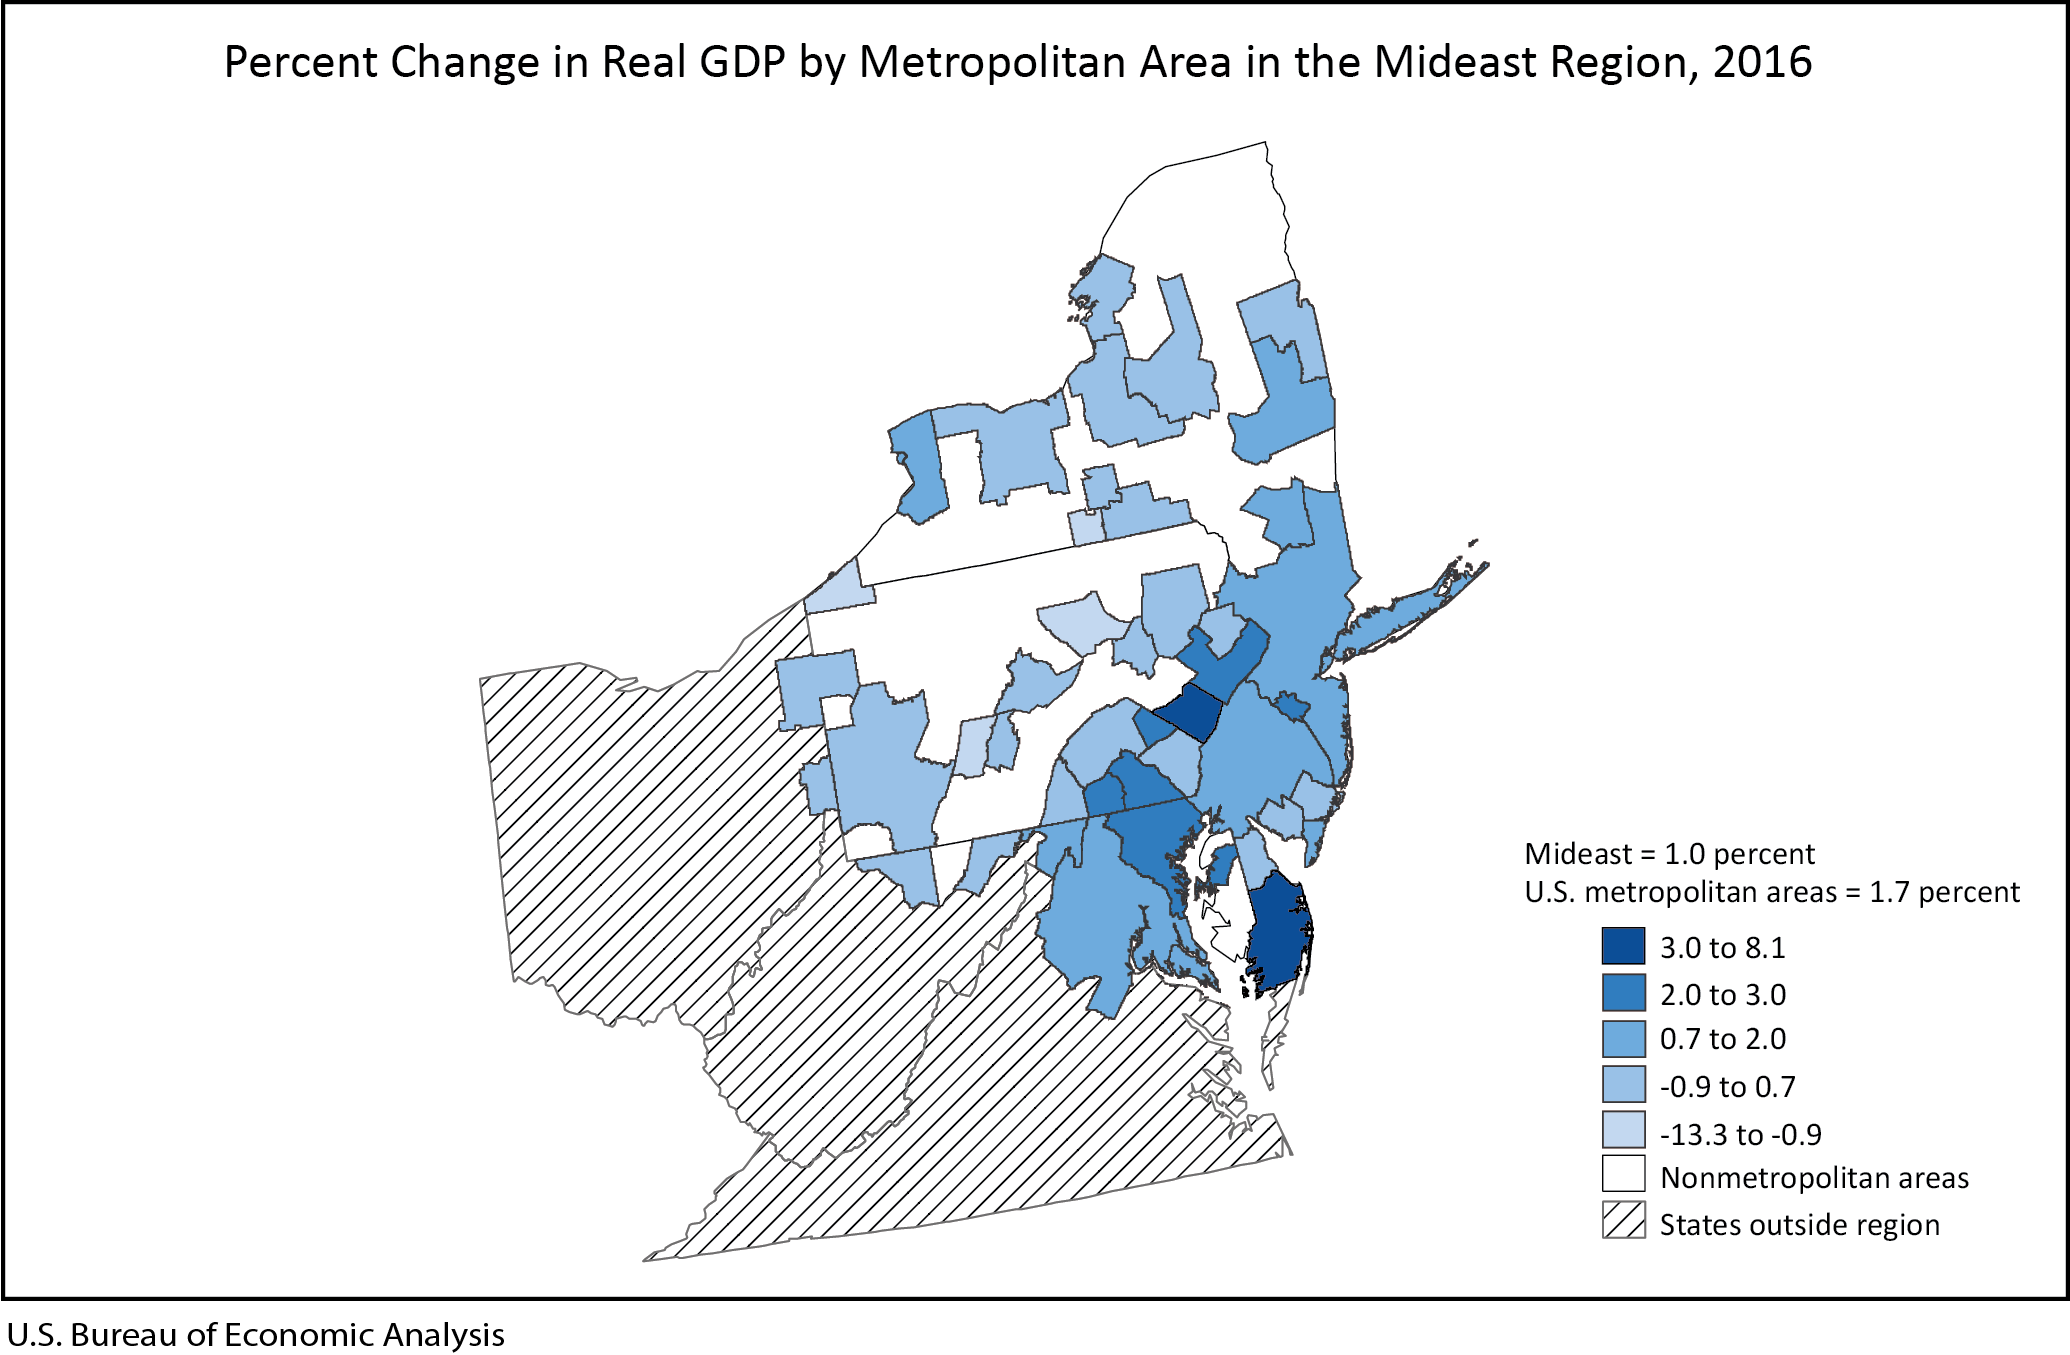 Graph of Percent Change in Real GDP by Metropolitan Area in the Mideast Region, 2016